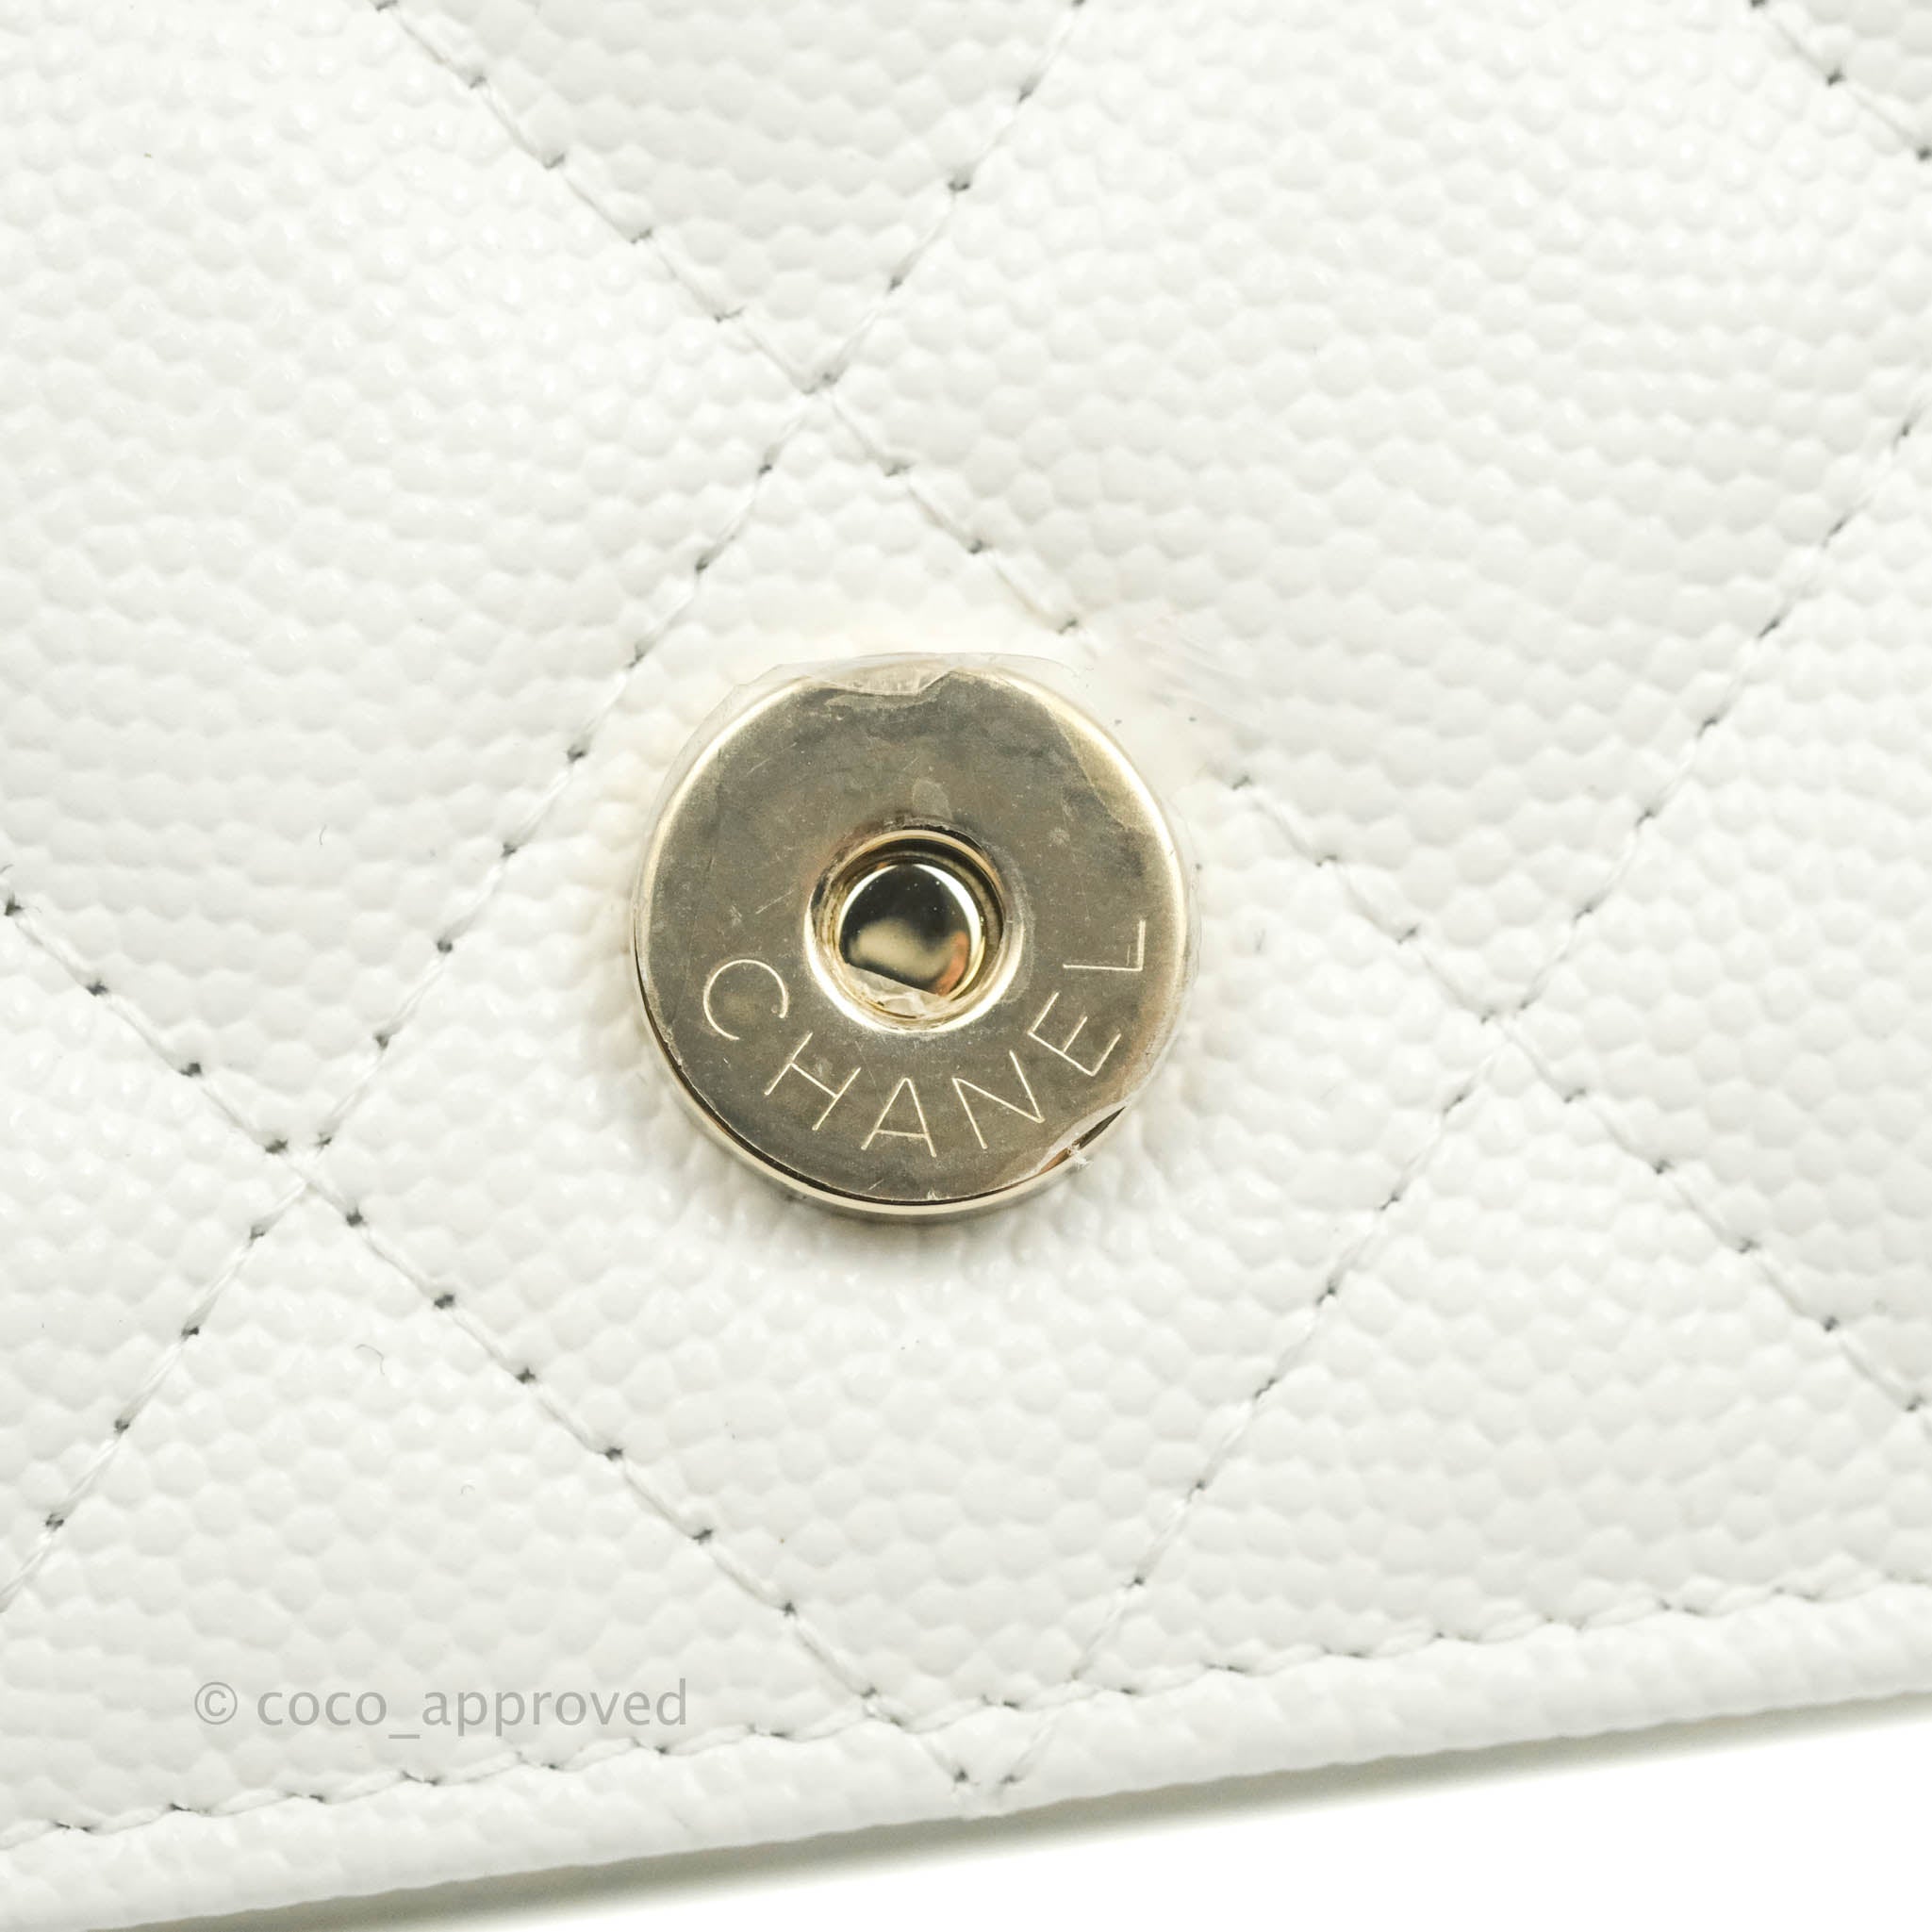 Chanel White Calfskin Quilted Leather Pearl Mini Wallet On Chain WOC Bag